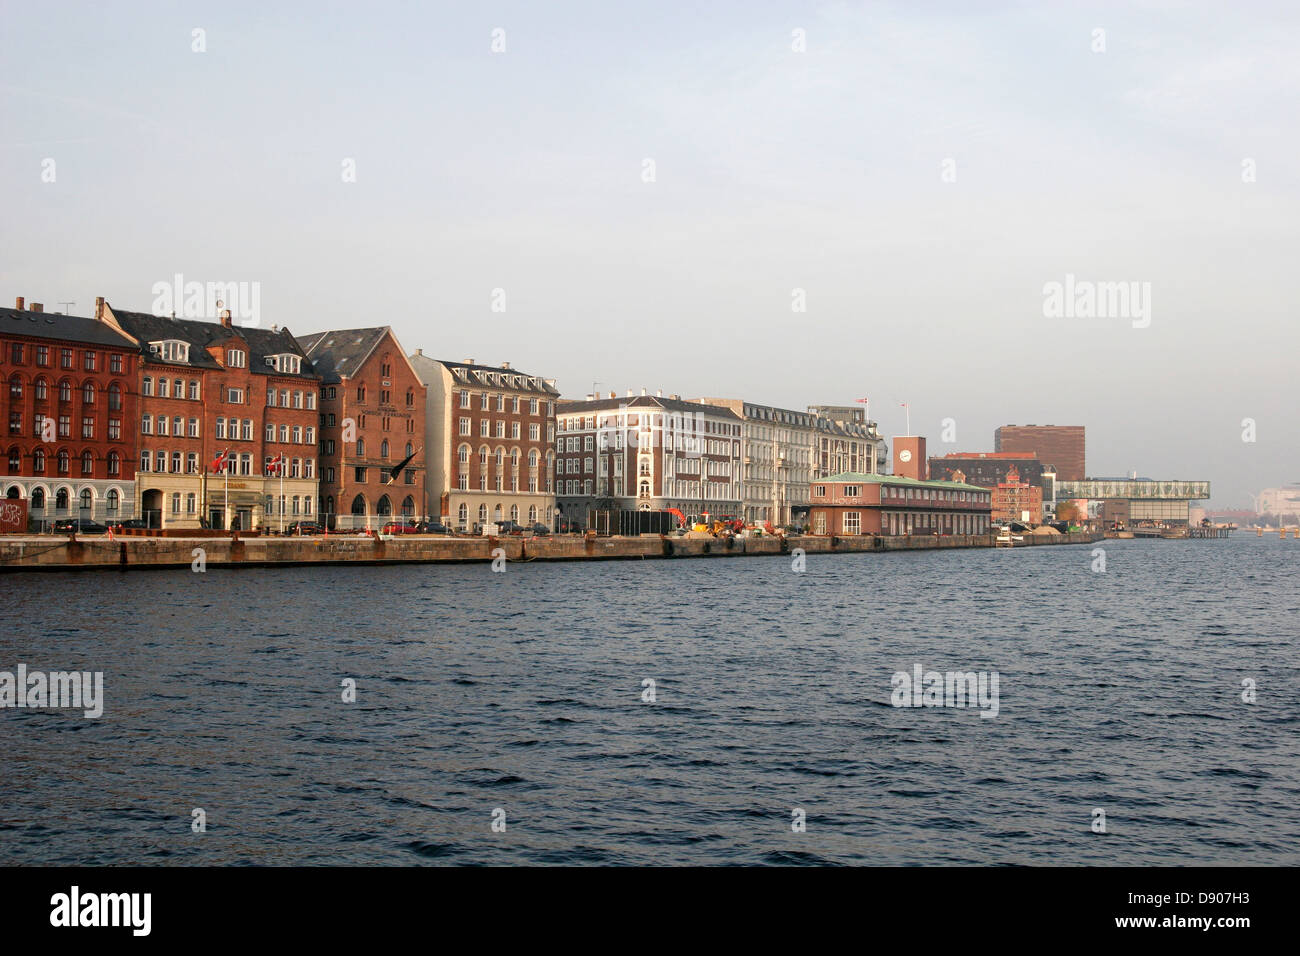 Copenhagen waterfront with the Royal Danish Theater (Skuespilhuset) on the background, Denmark Stock Photo